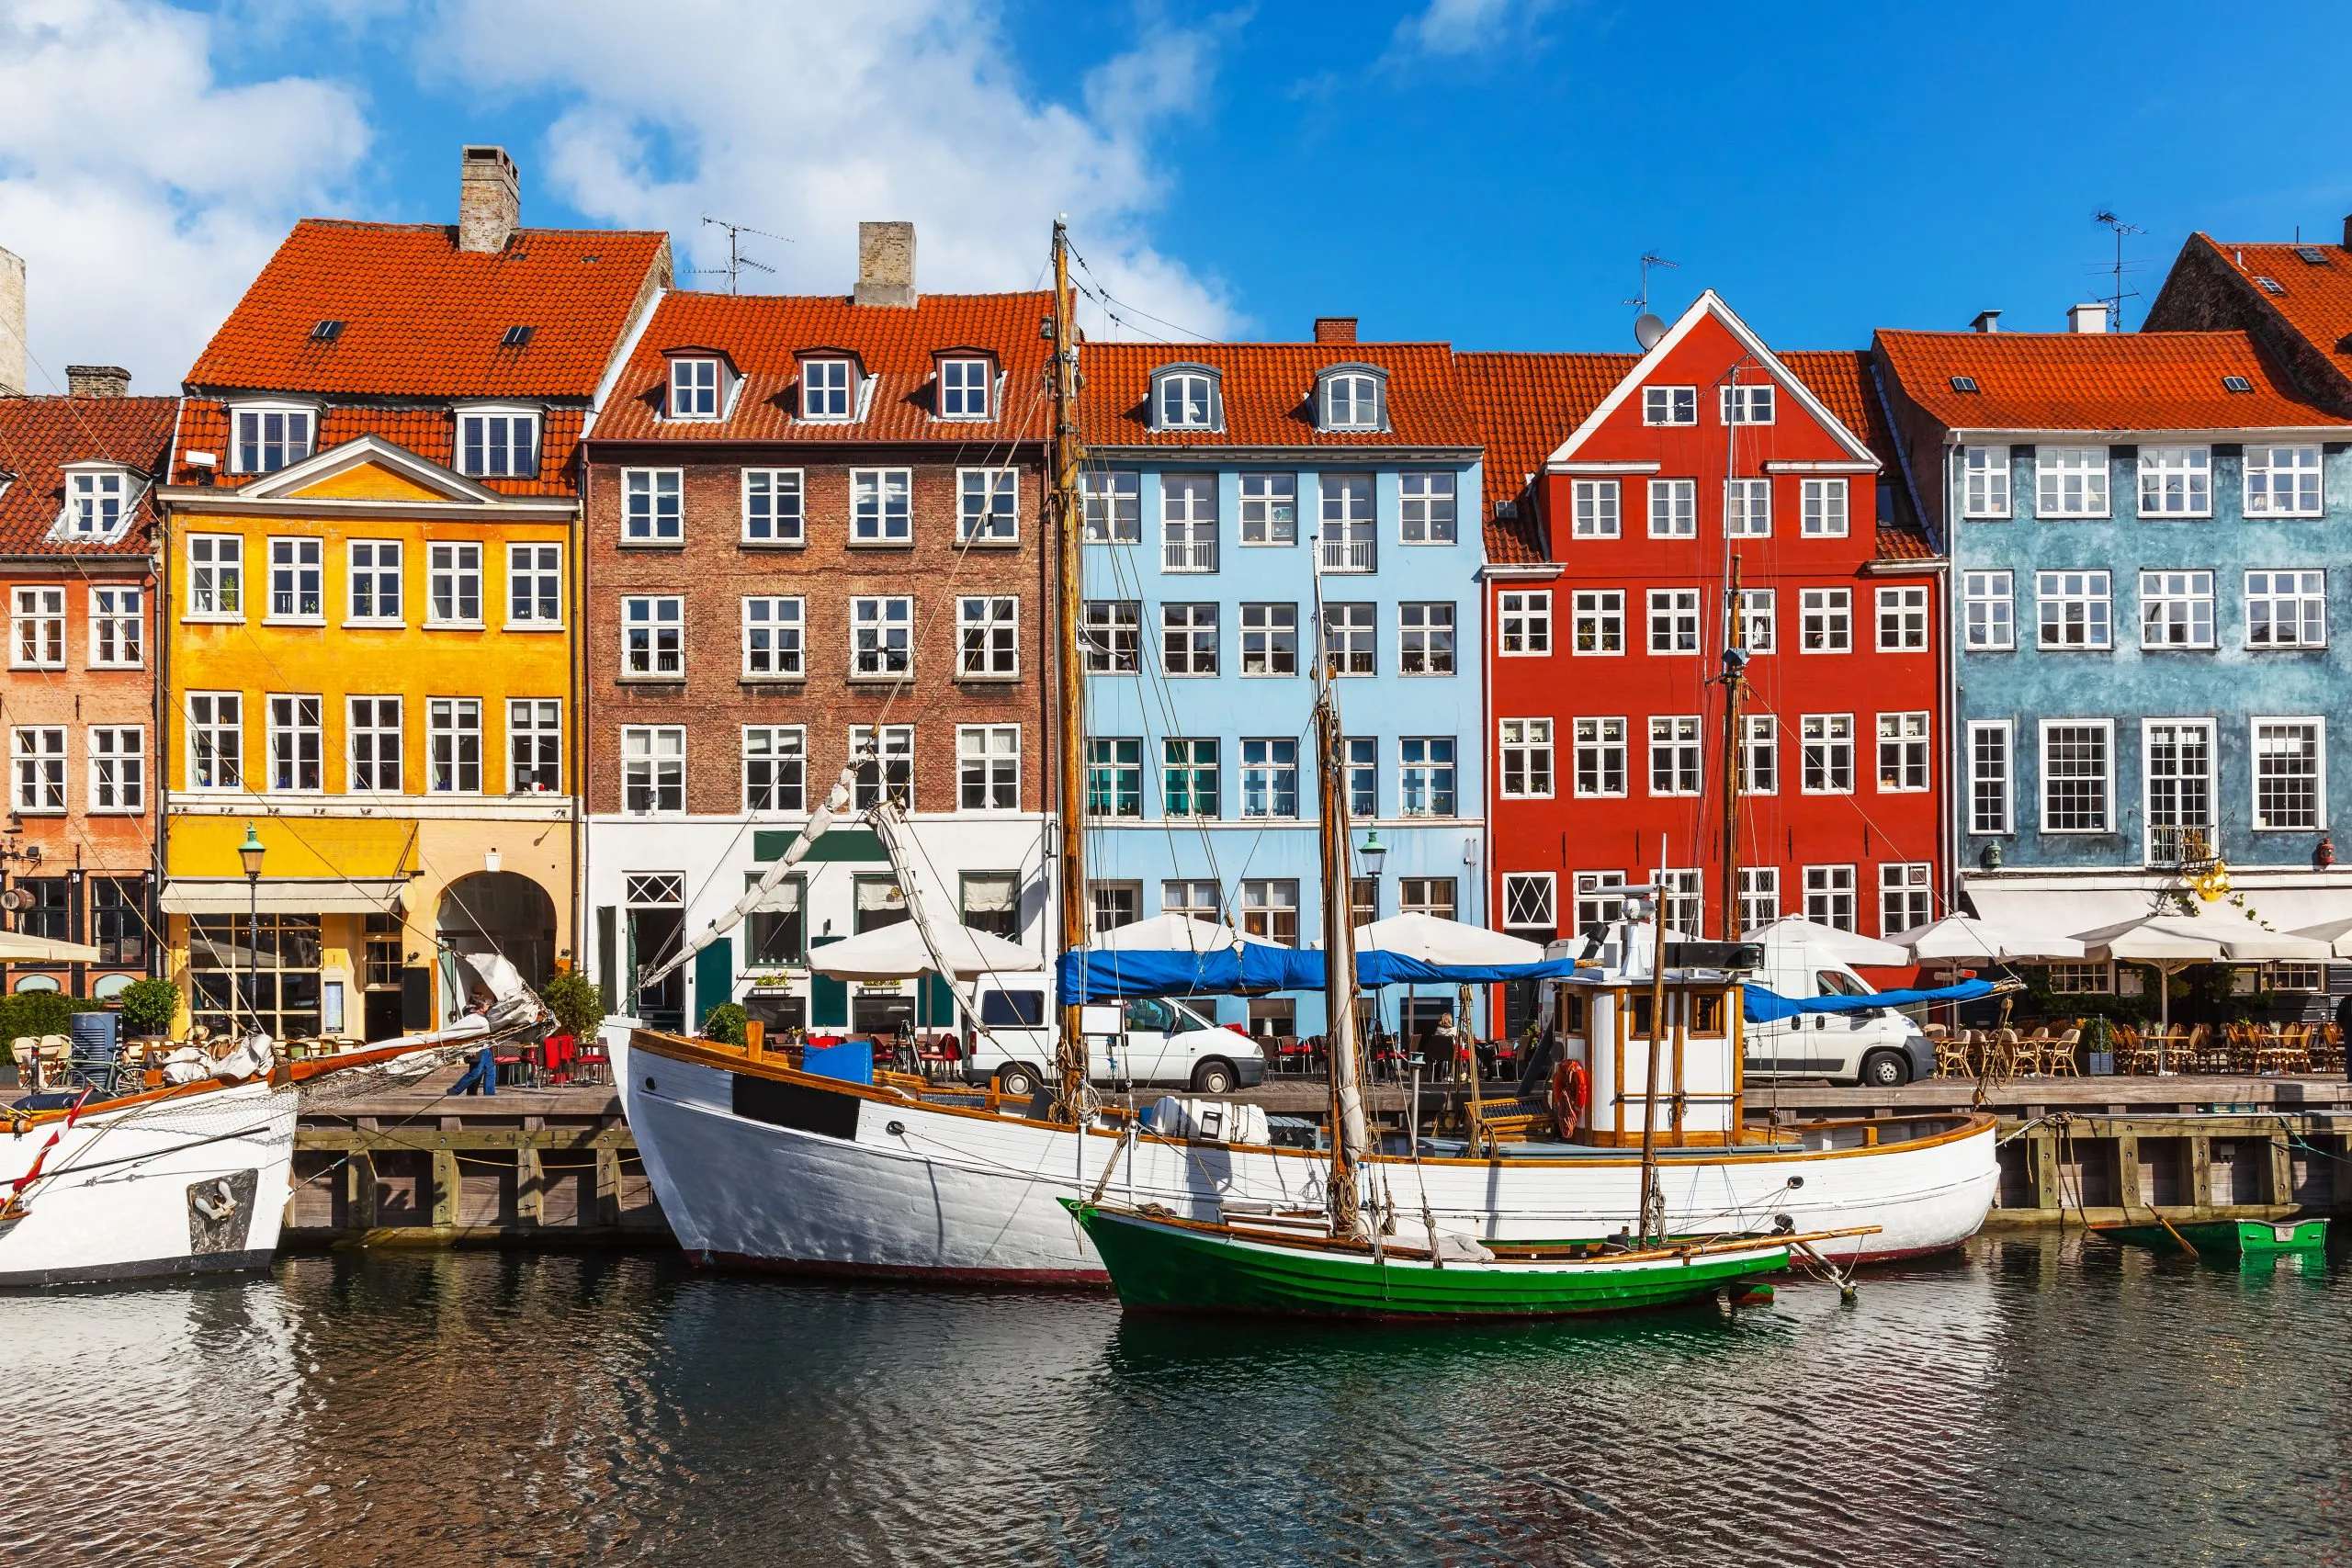 35 Best Cities to Visit in Europe (Bucket List for City Lovers!)